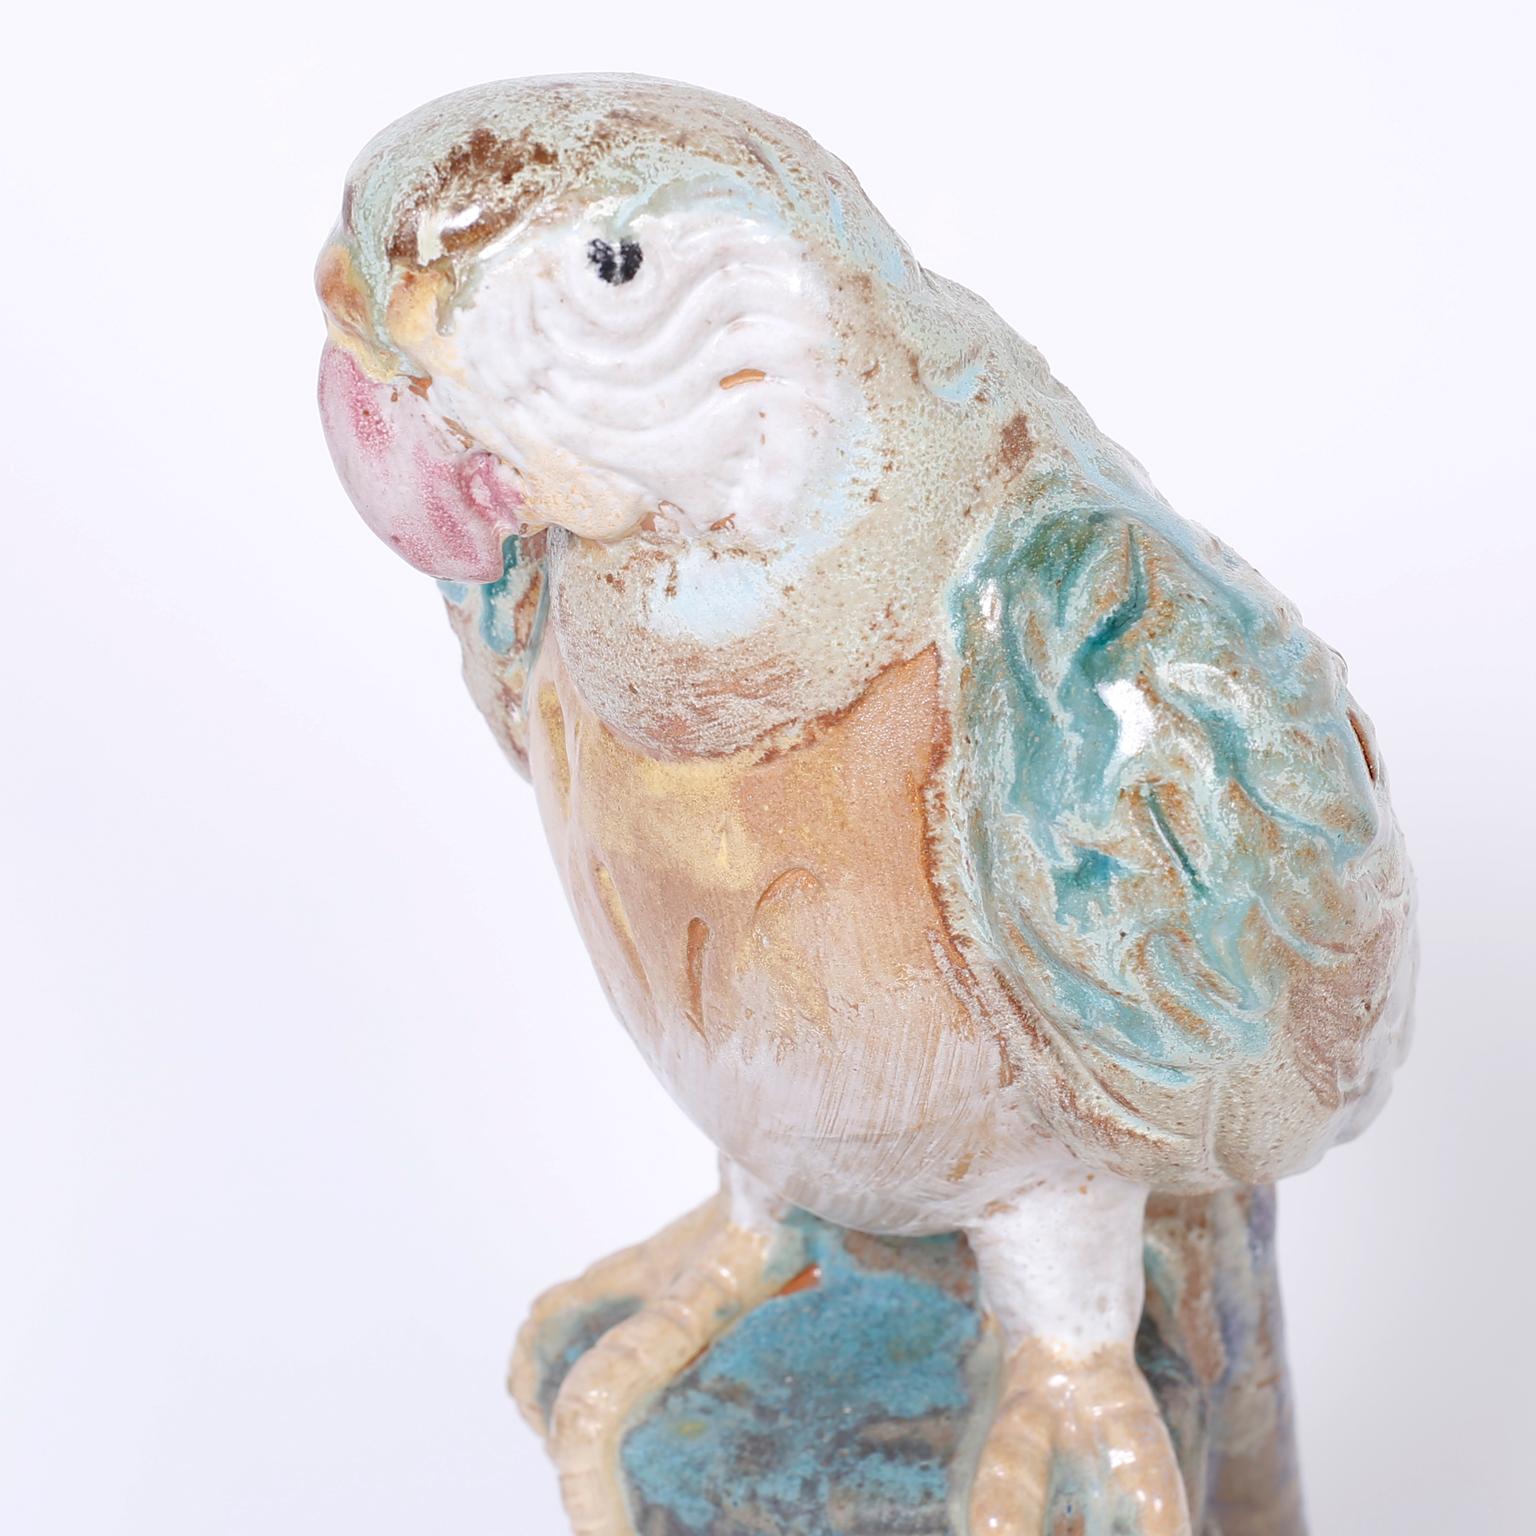 Life-size terracotta parrot or bird with a quizzical expression, decorated and glazed with soft muted colors.